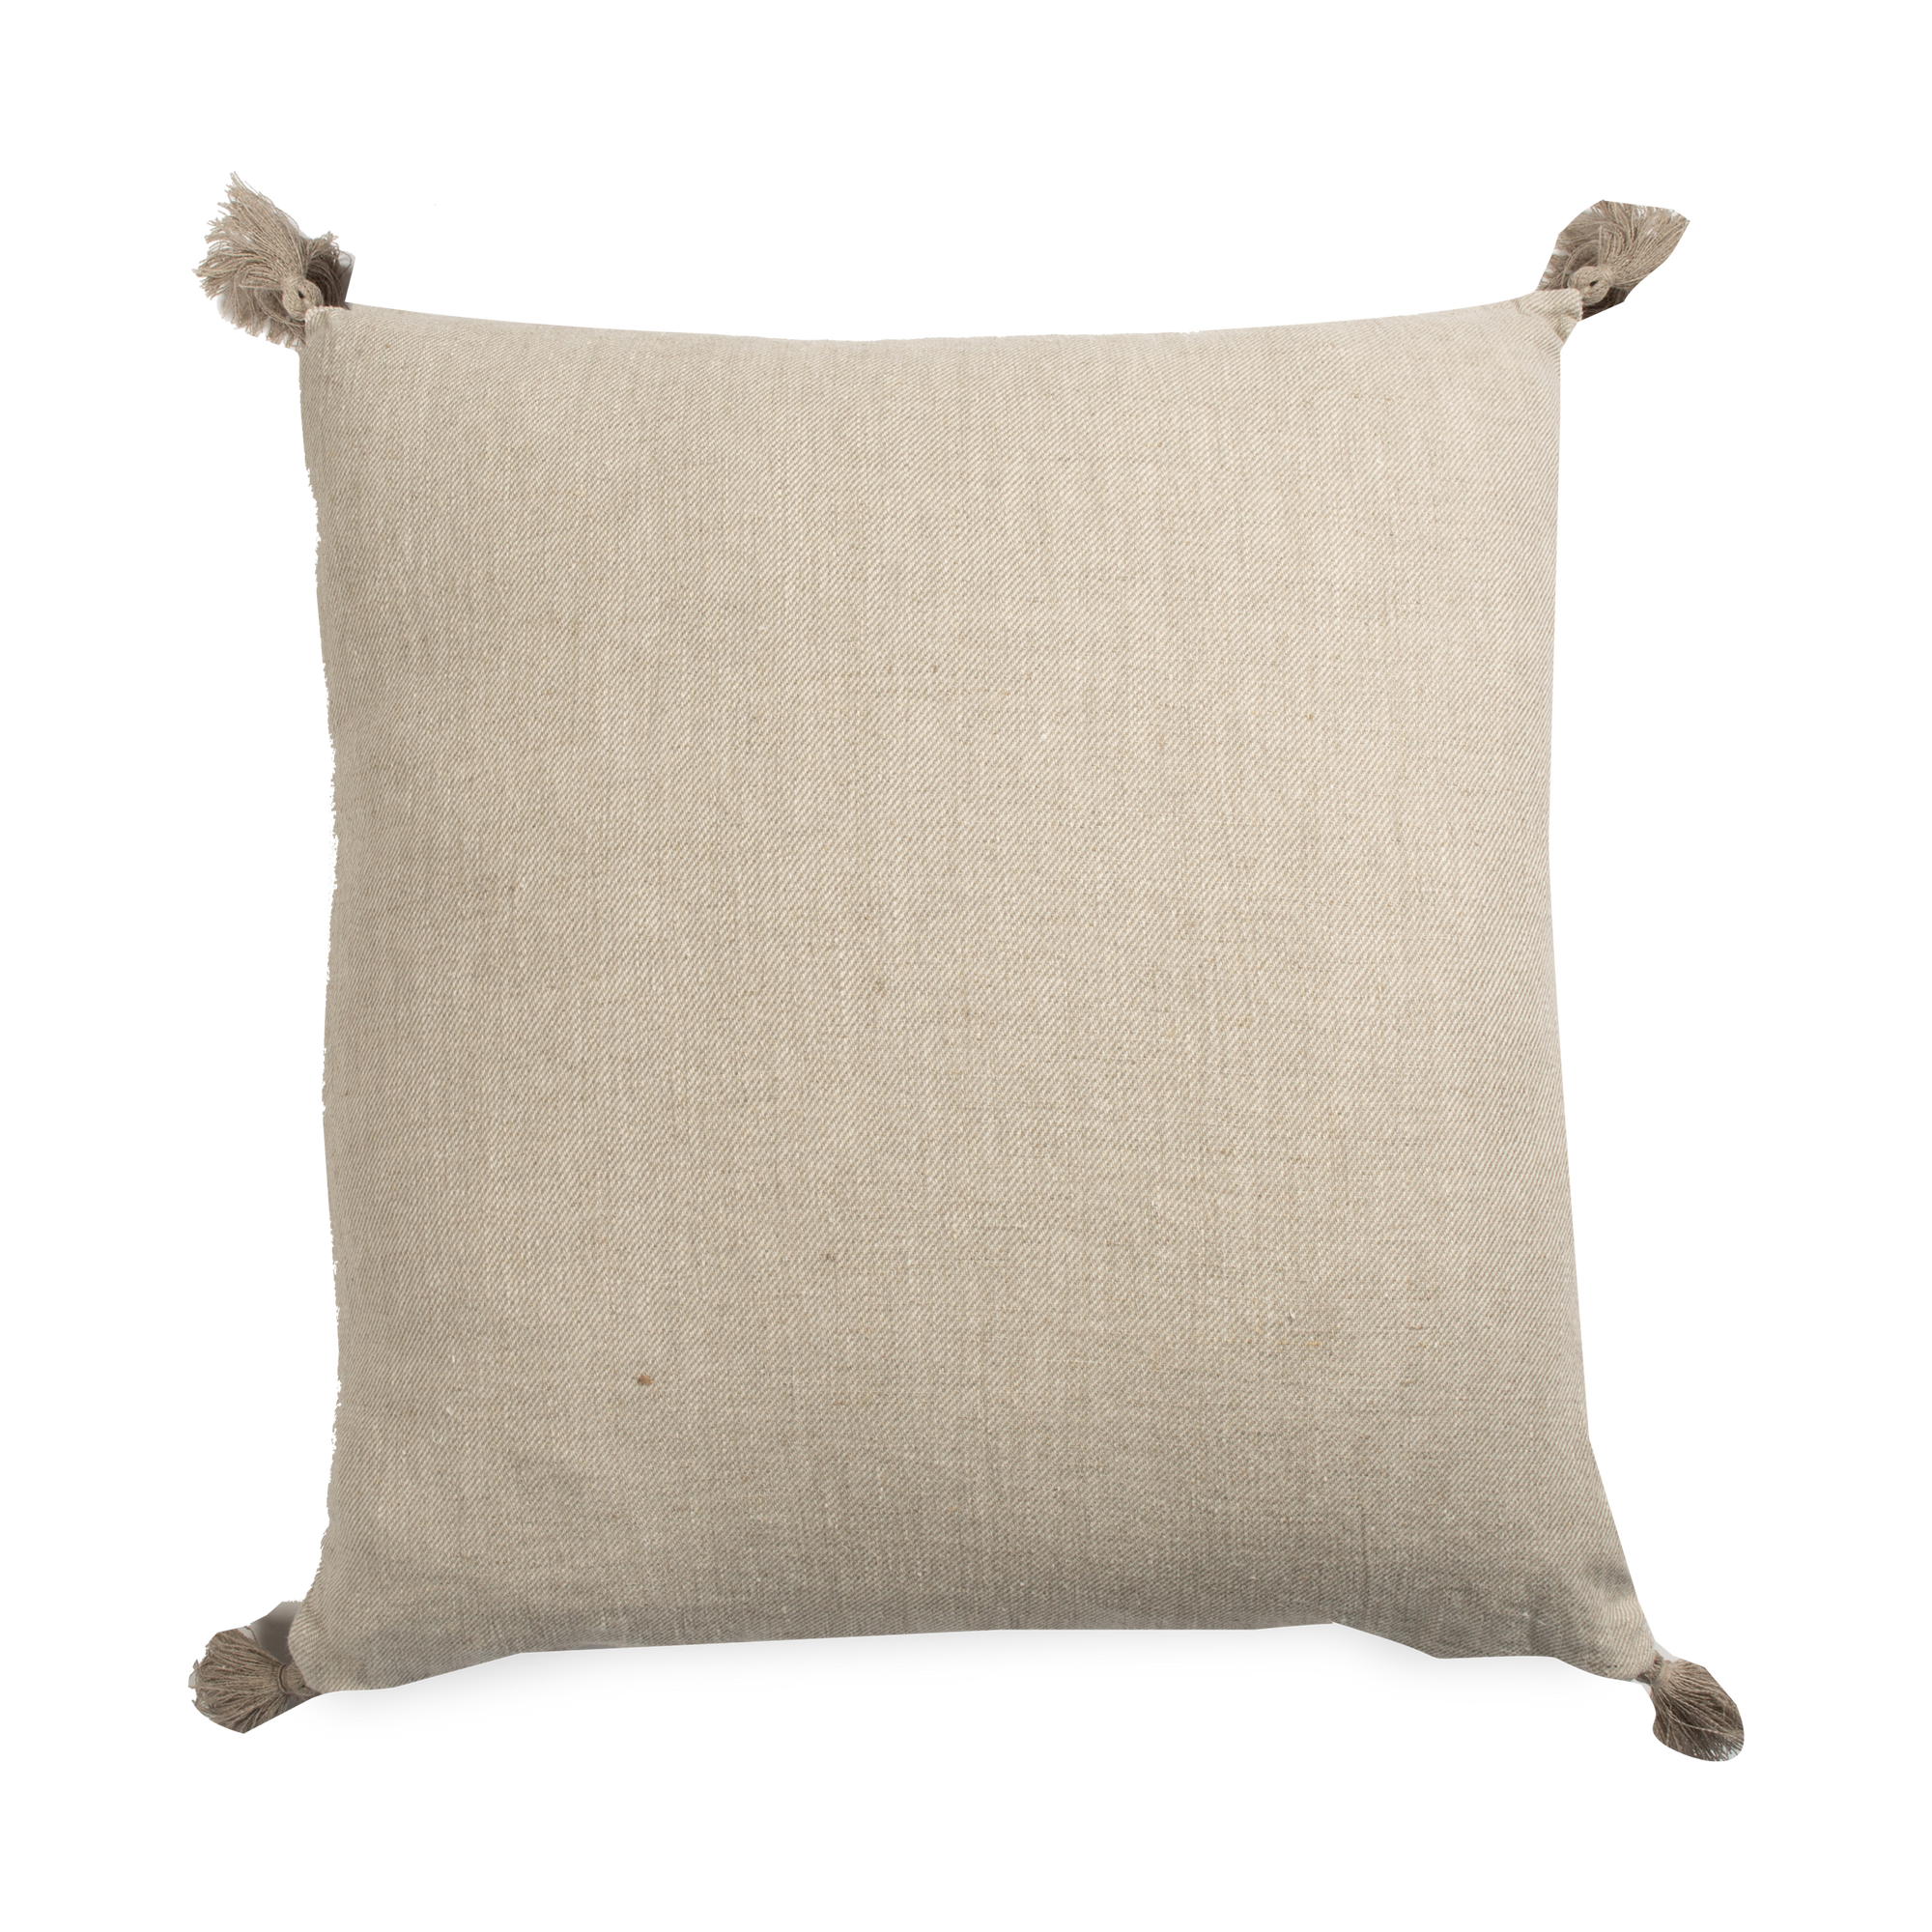 This pillow features a stone-washed linen covers in a flax hue with a tassel in each corner.